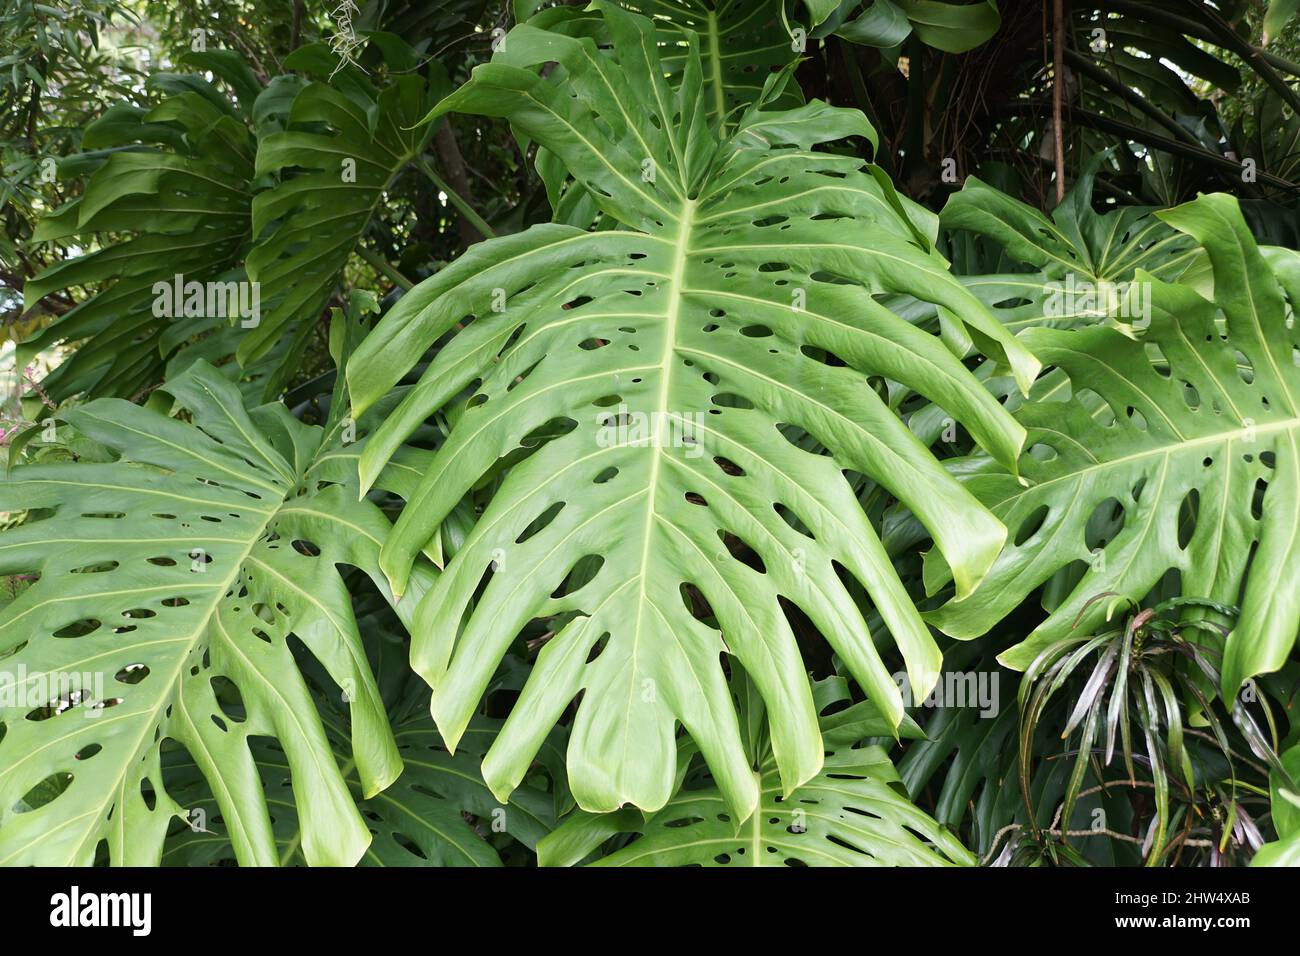 A big Monstera Deliciosa plants growing wild with large green leaves ...